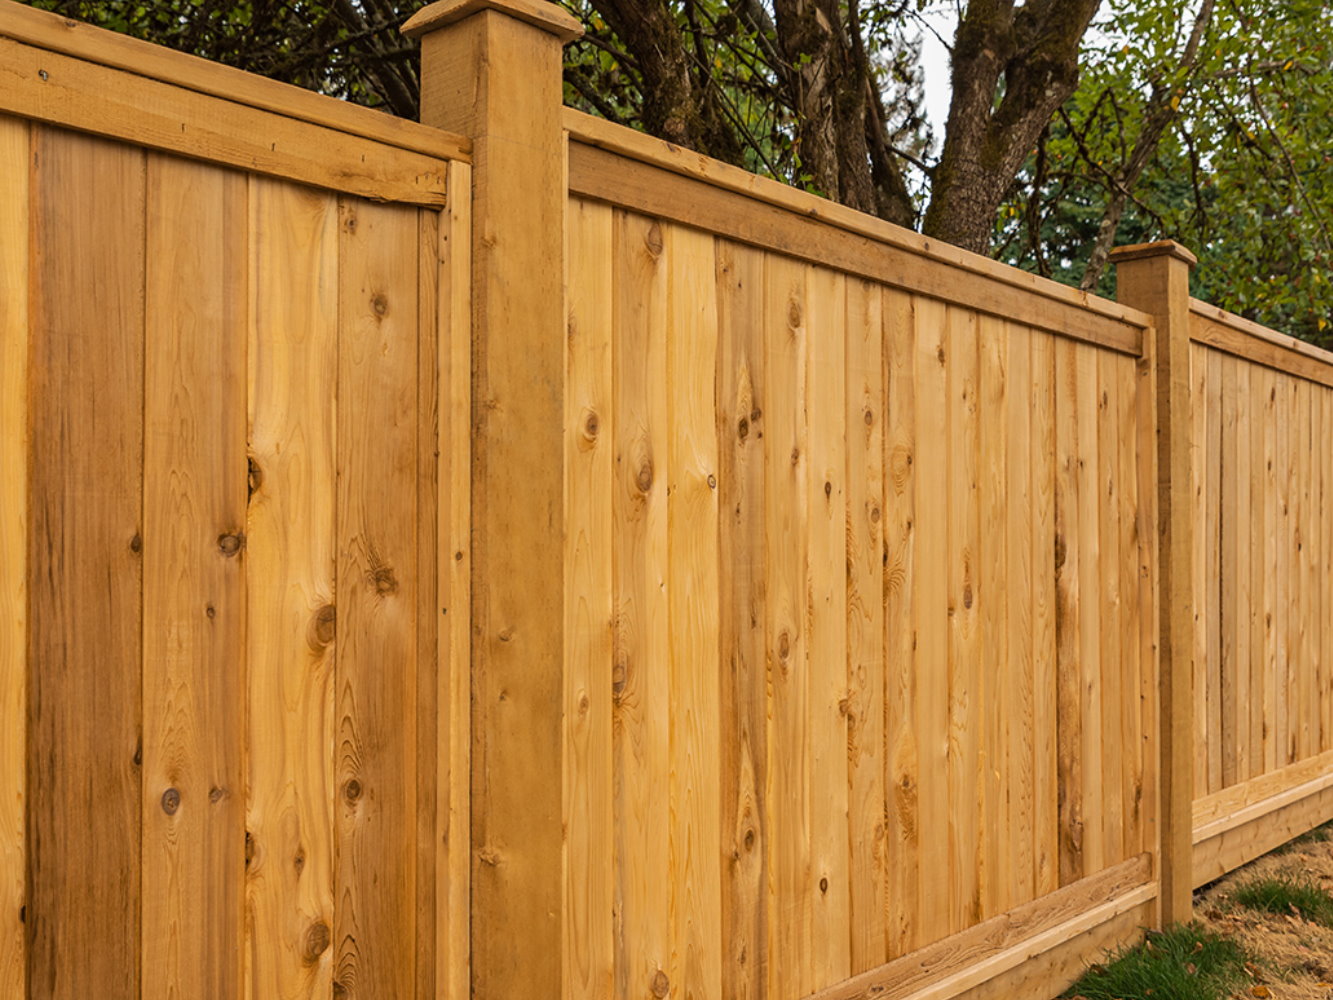 Willacoochee GA cap and trim style wood fence